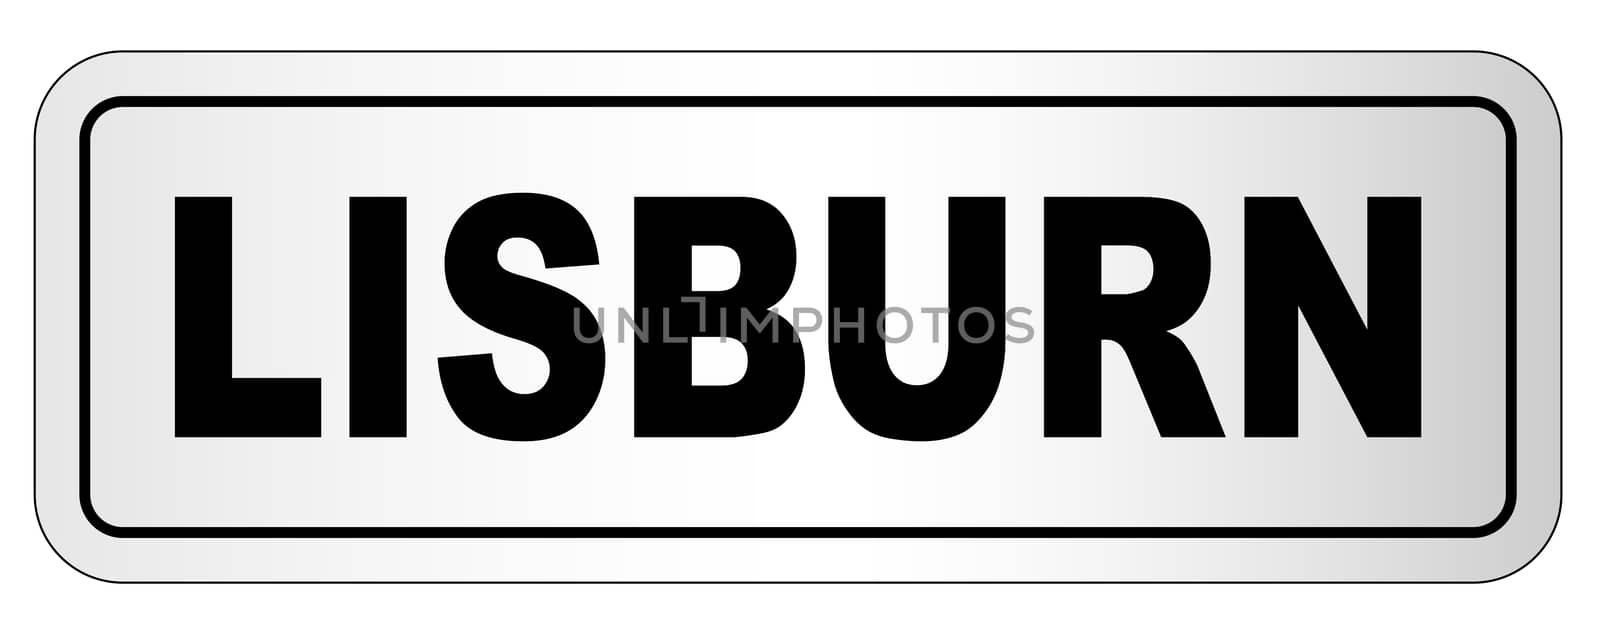 The city of Lisburn nameplate on a white background